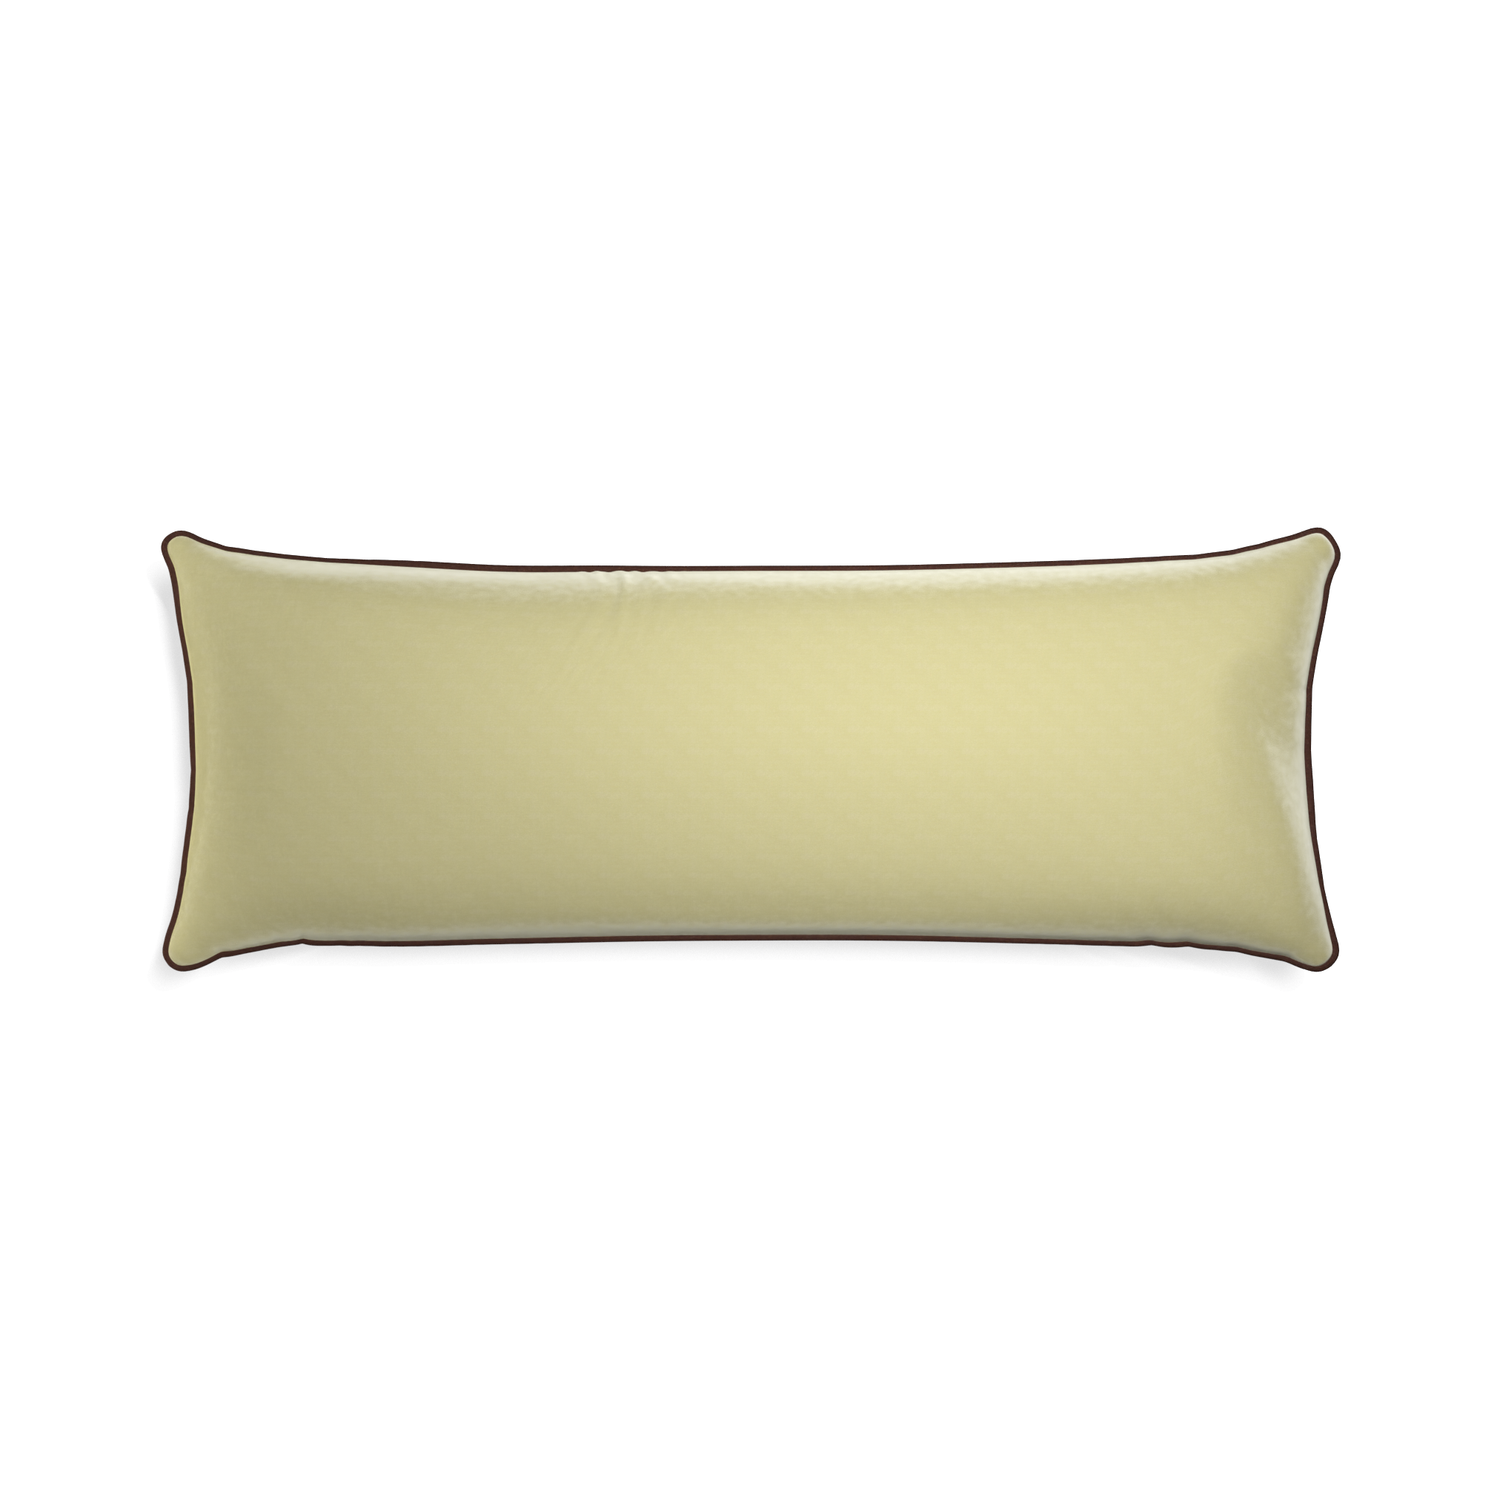 Xl-lumbar pear velvet custom pillow with w piping on white background